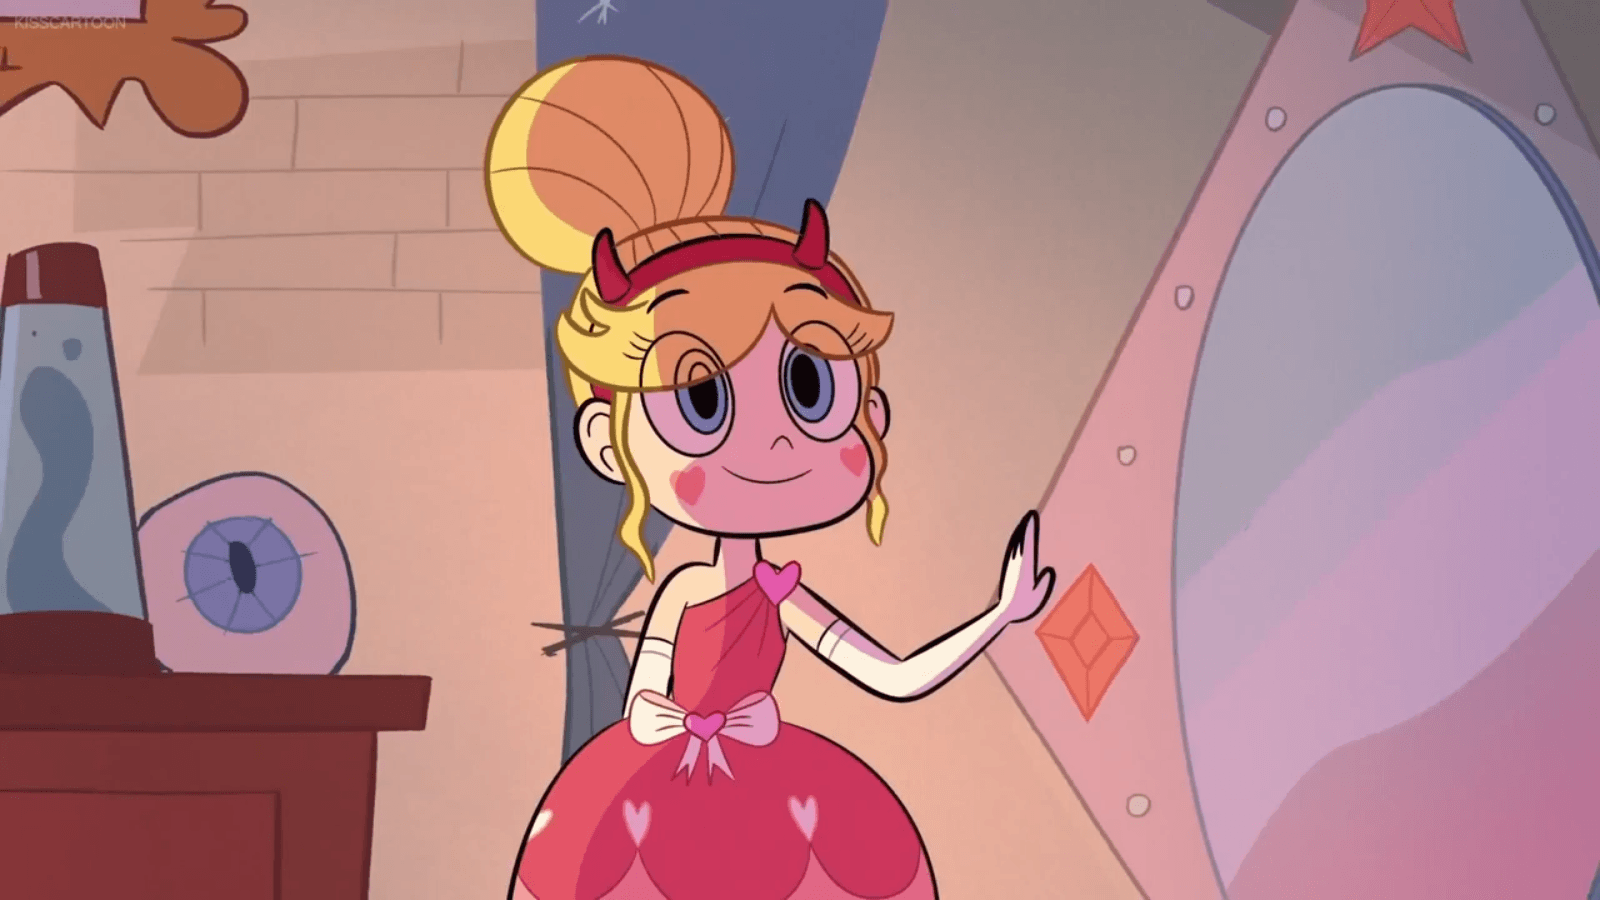 Star Vs. The Forces Of Evil Background 10